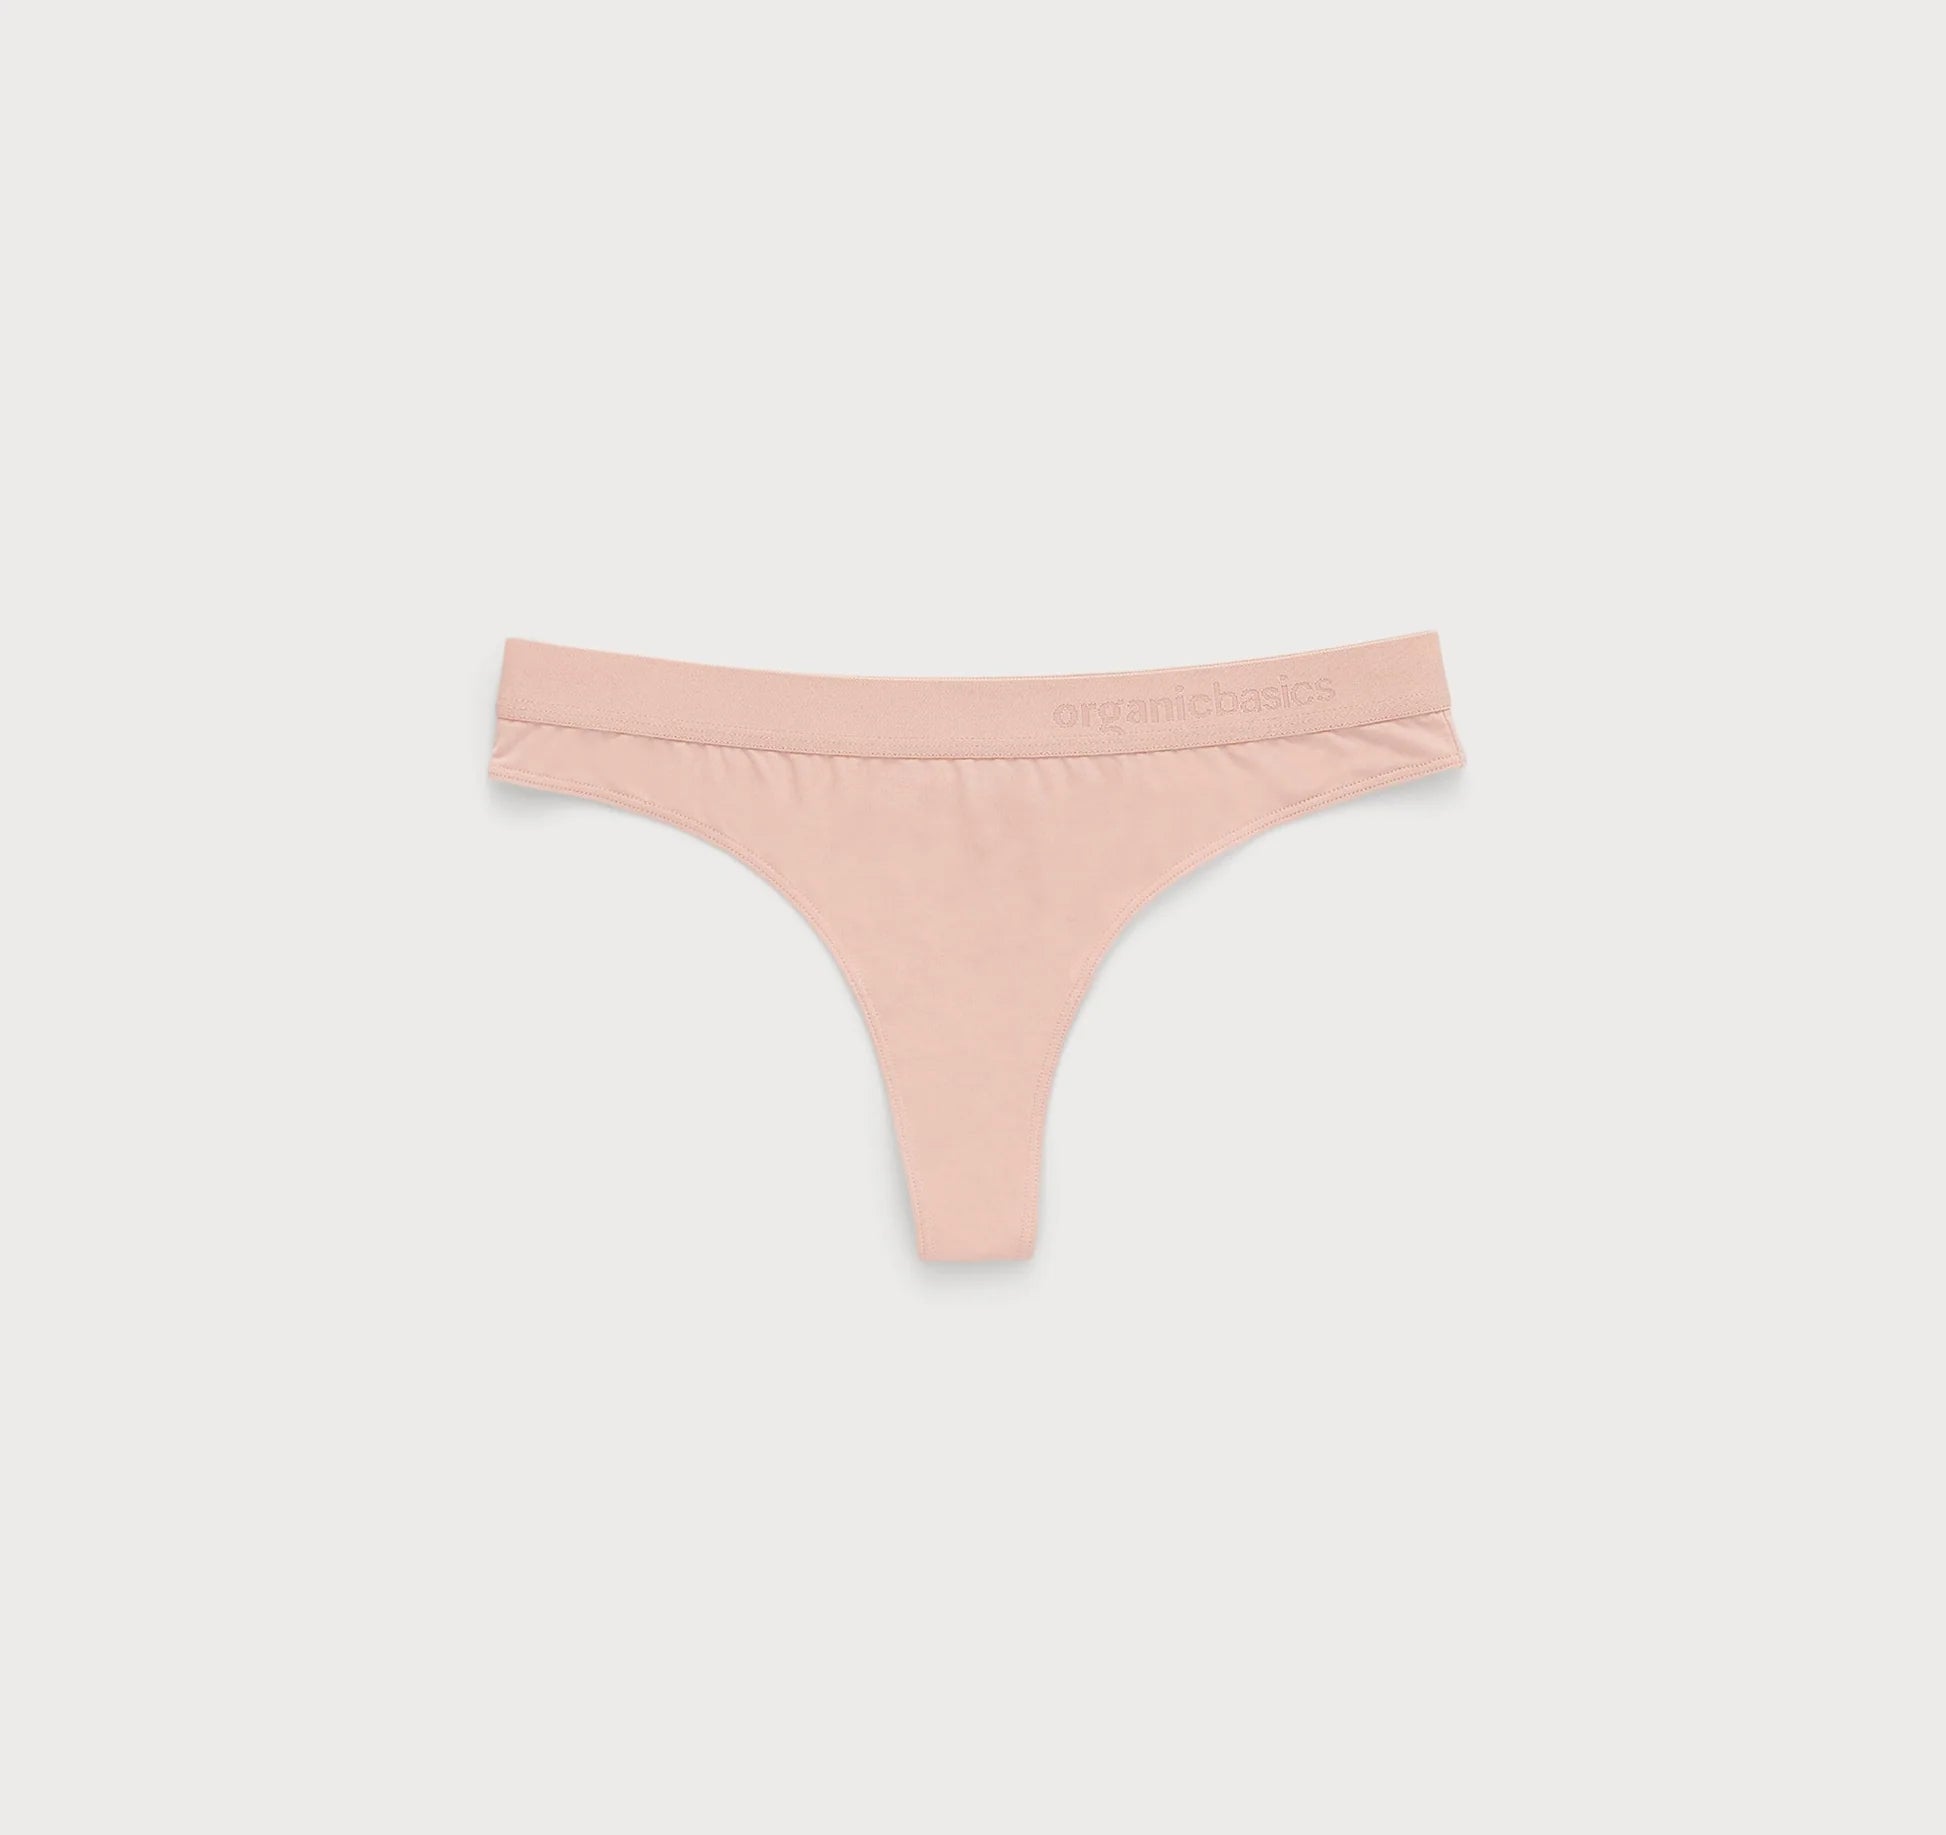 A Soft Touch Tanga 2-Pack - Soft Pink made from sustainable TENCEL, the softest fabric, on a white background by Organic Basics.